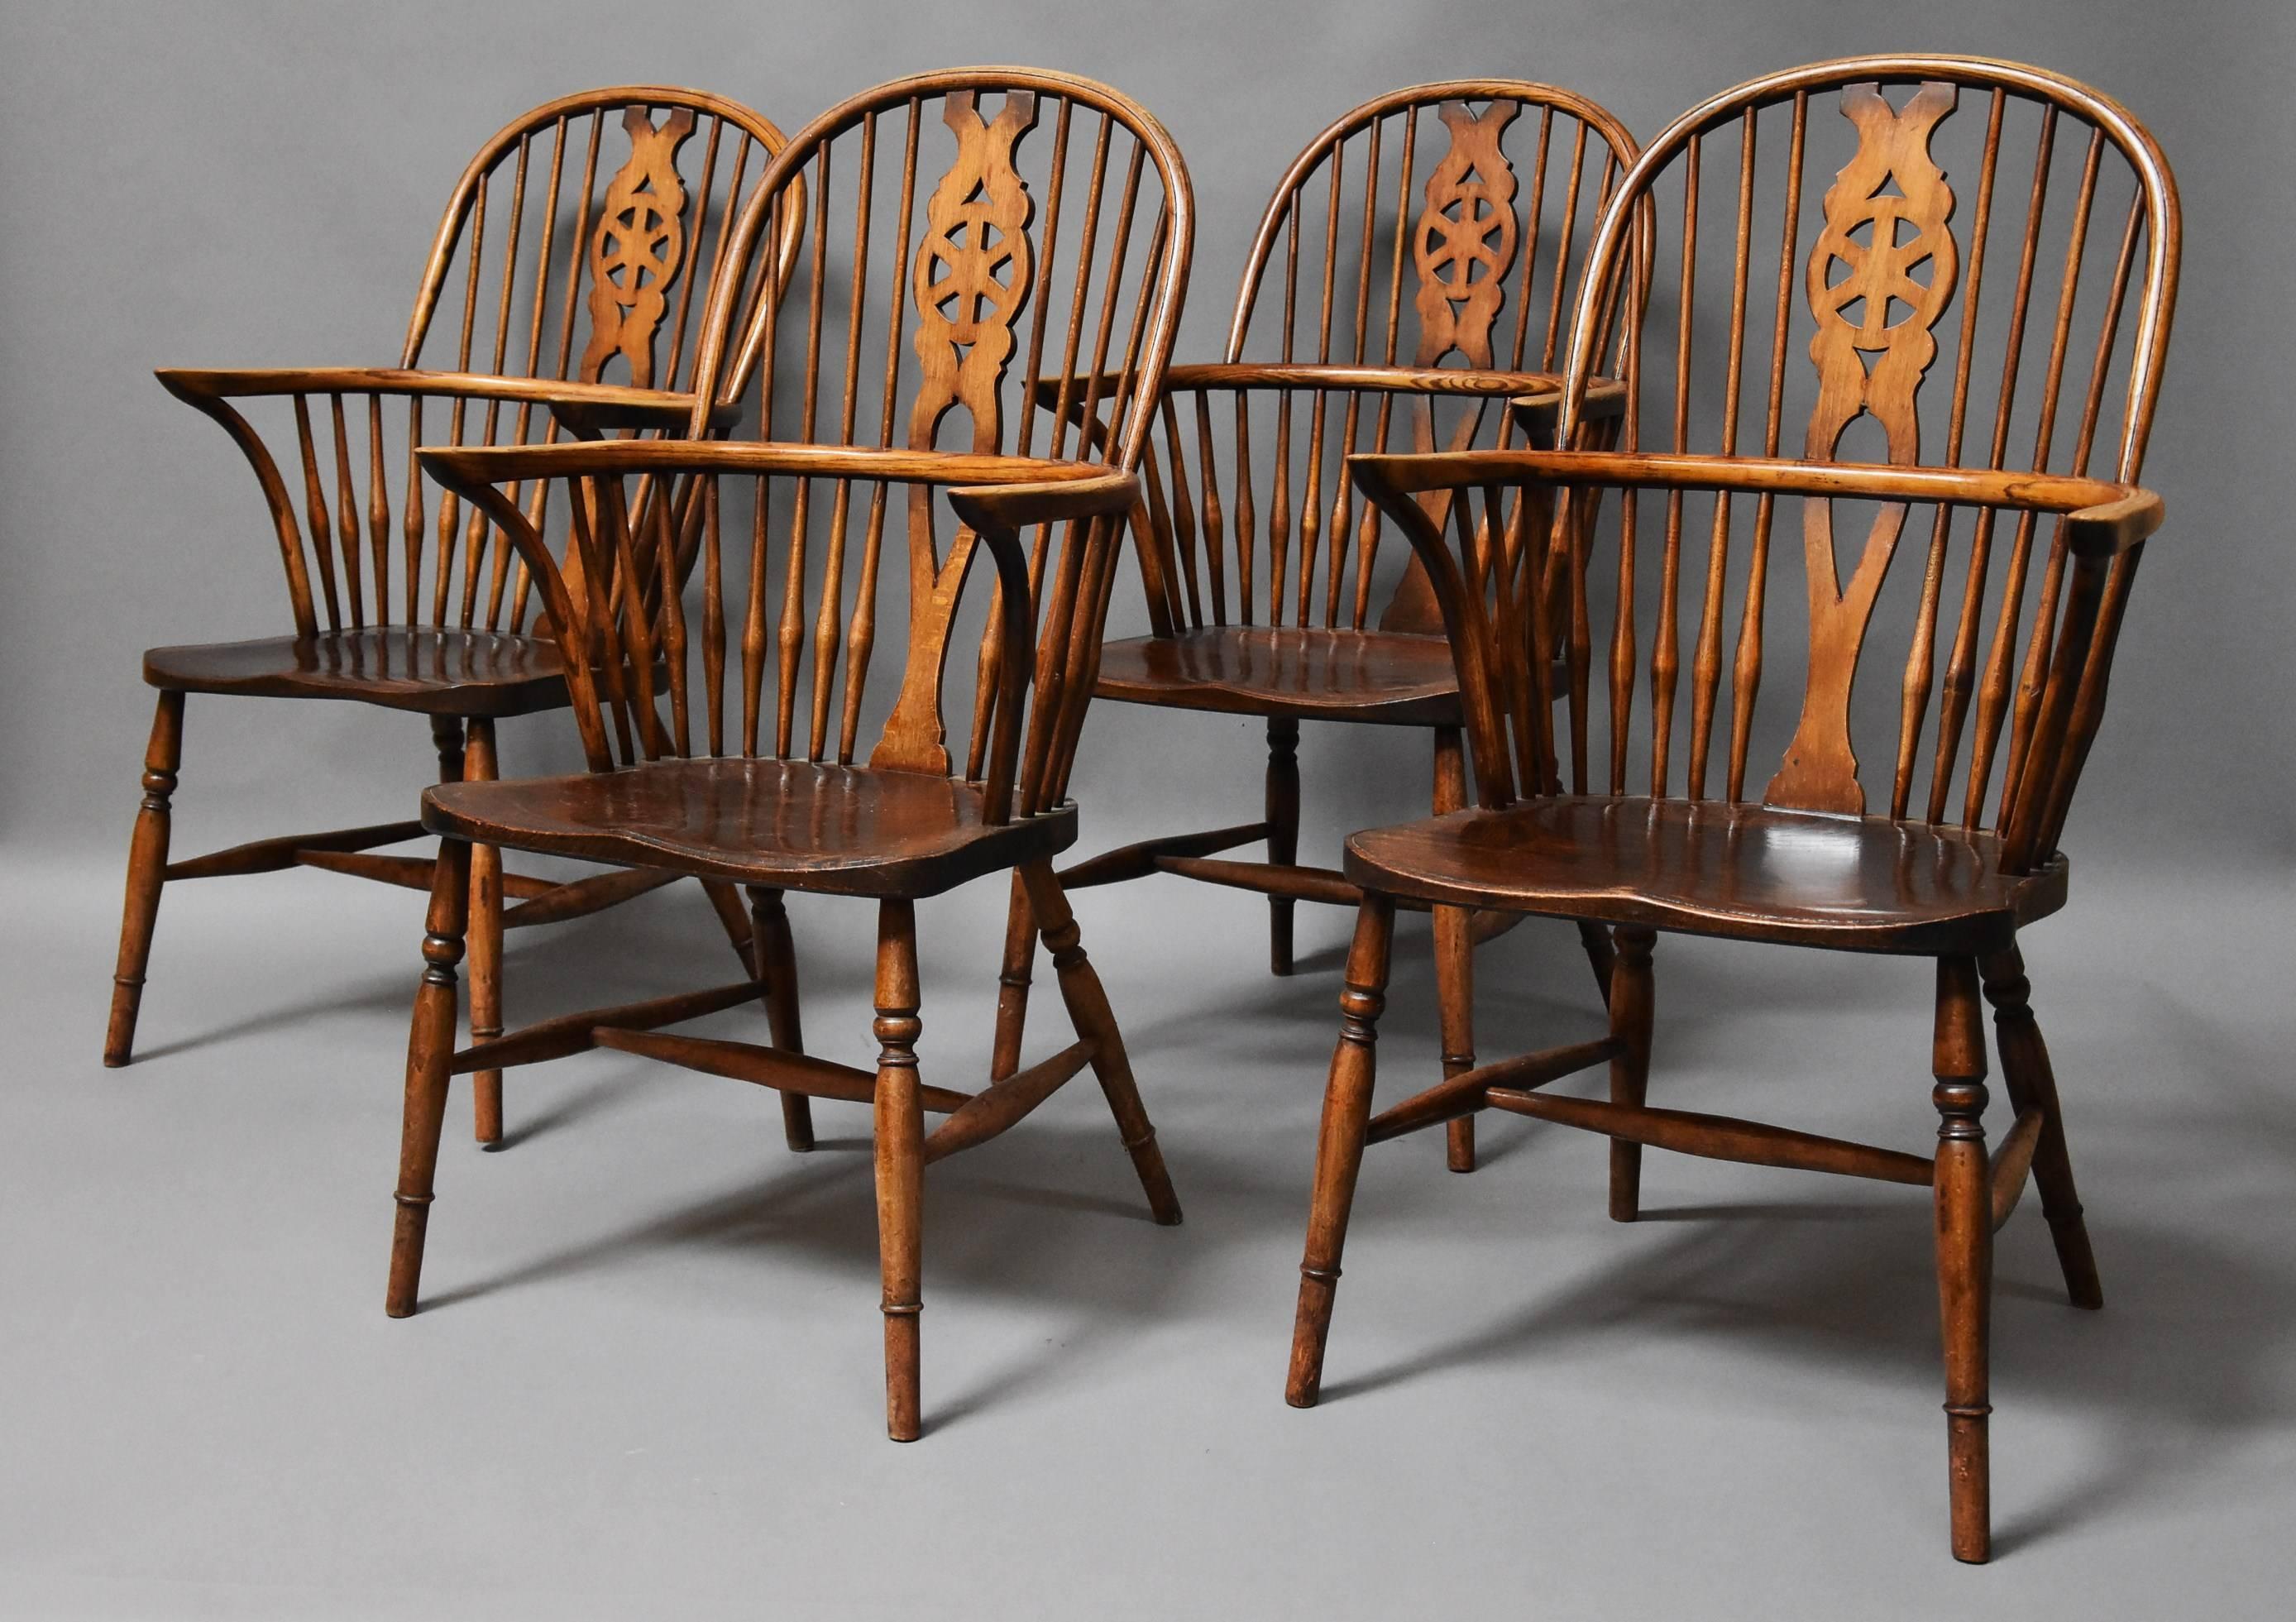 A set of four early 20th century ash and elm wheelback Windsor chairs.

These chairs consist of a hoop back leading down to a central pierced splat with wheel design with four turned spindles to either side.

This leads down to the arms and the